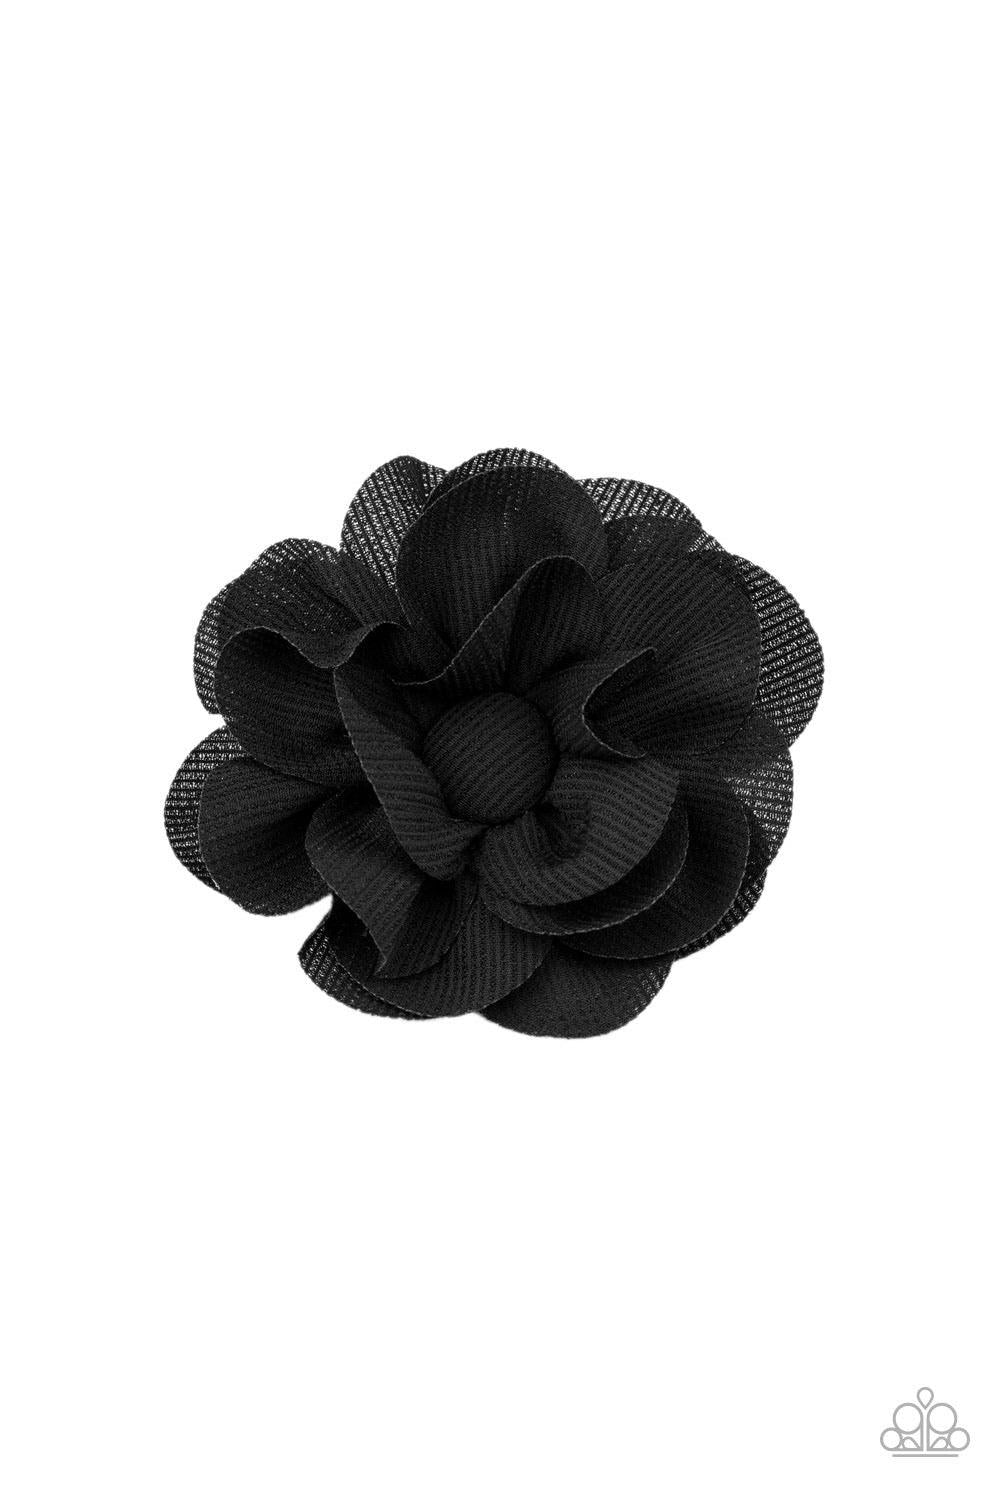 Paparazzi Accessories Summer Soirée - Black Black textured chiffon petals delicately gather around a matching button-top center, layering into a whimsical blossom. Features a standard hair clip on the back. Sold as one individual hair clip. Hair Accessori